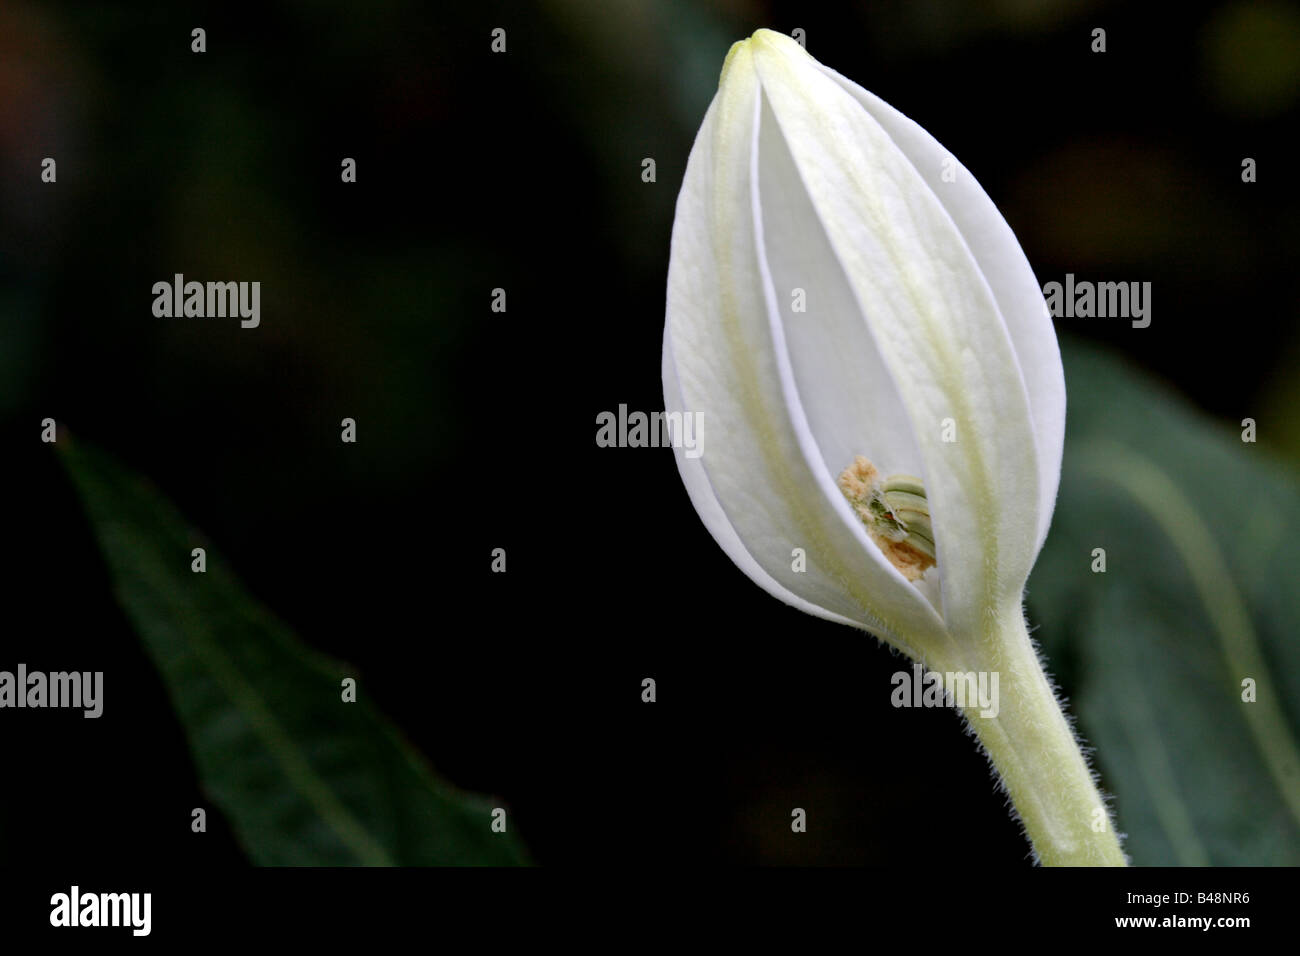 Close-up of a Isotoma flower Stock Photo